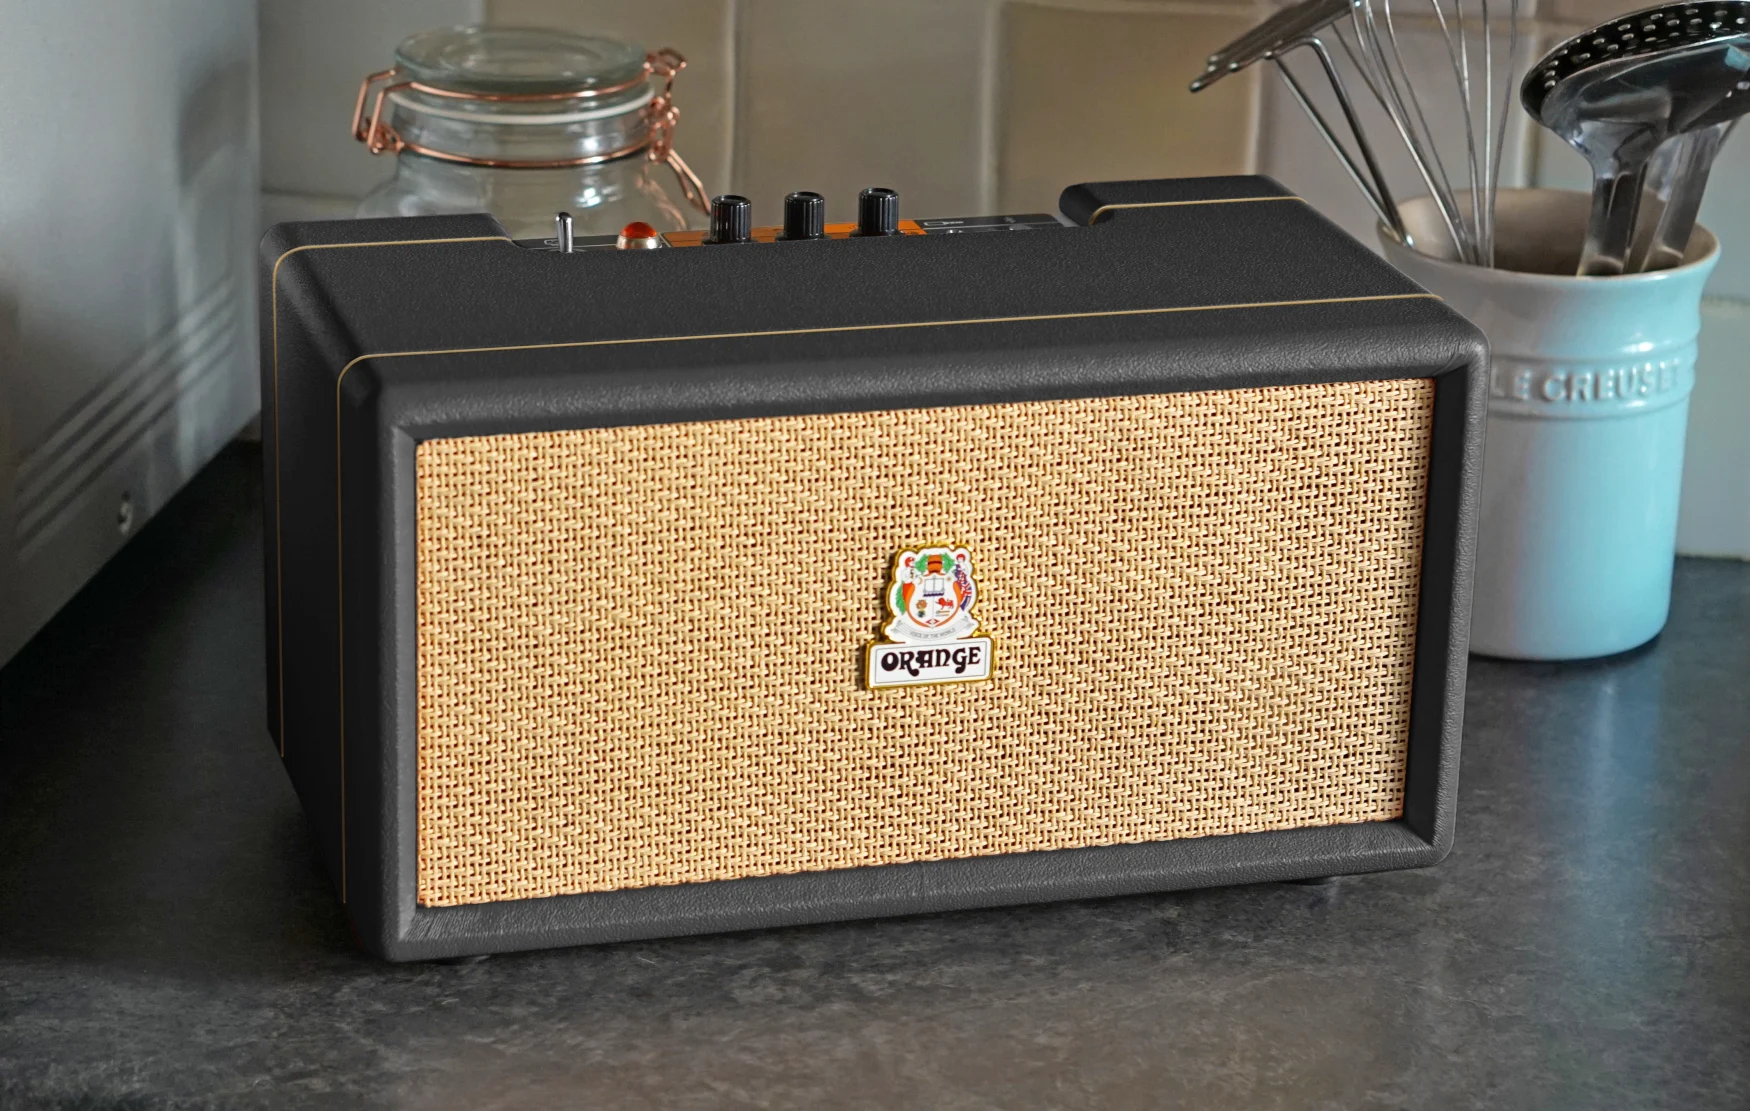 An Orange Amps Box-L wired Bluetooth talker  with a achromatic  exterior sits connected  a granite room  countertop.